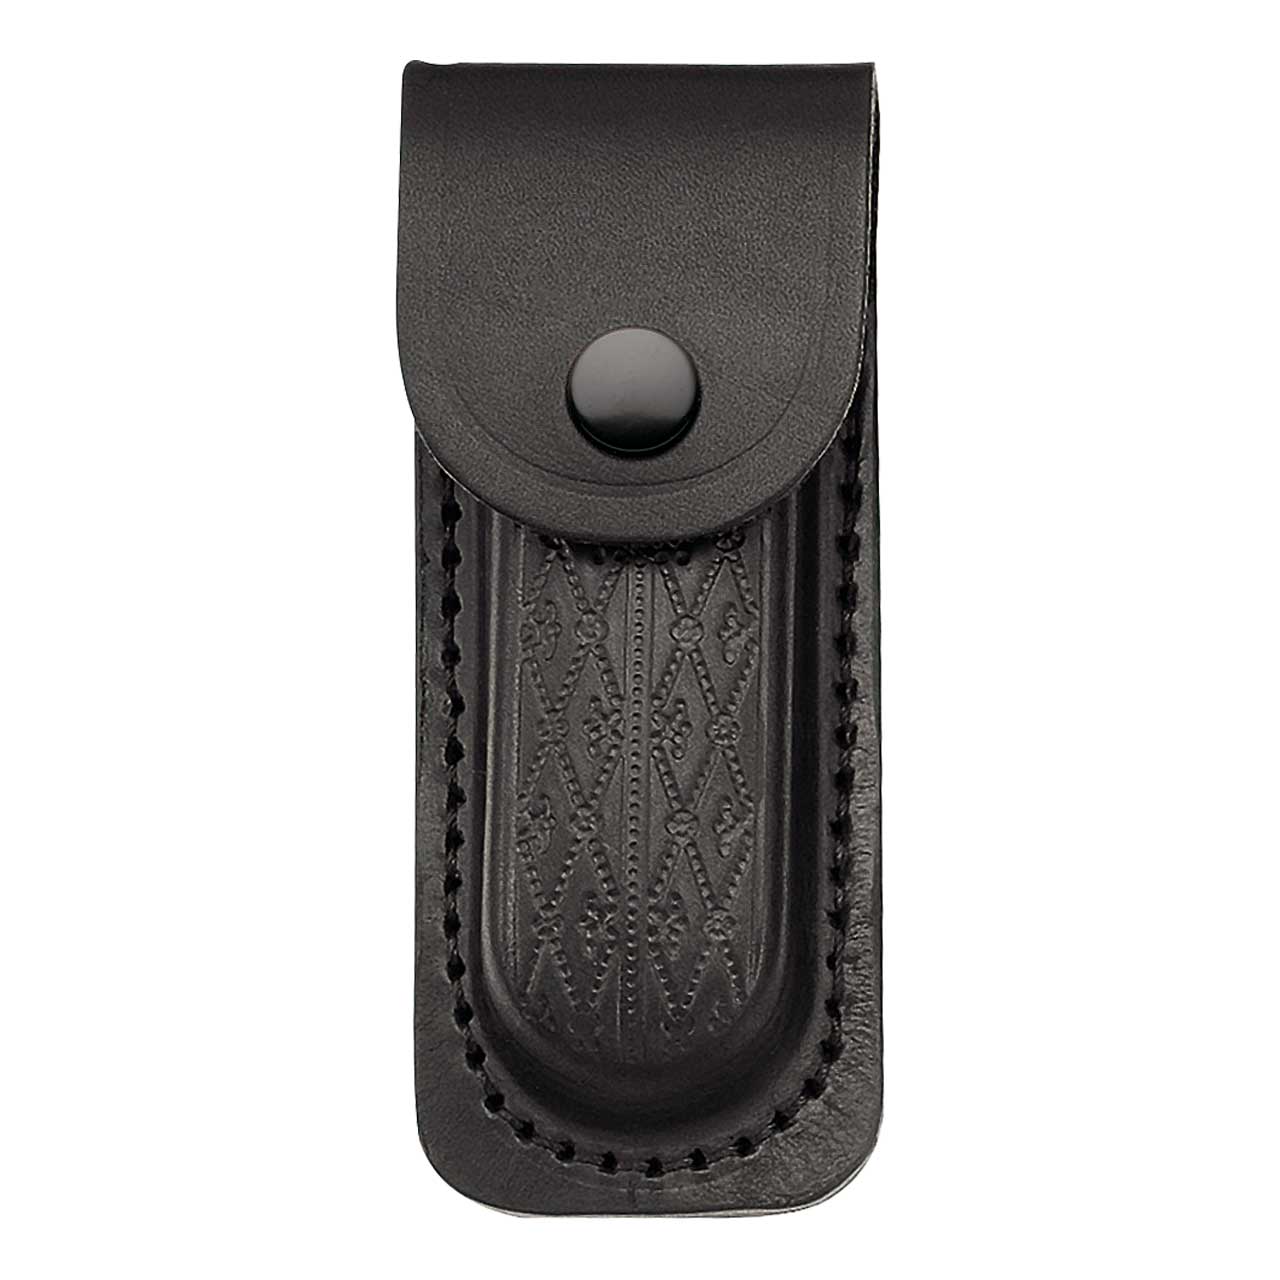 Picture of Herbertz - Leather Case Black with Embossed Pattern for Stapler Length 11 cm